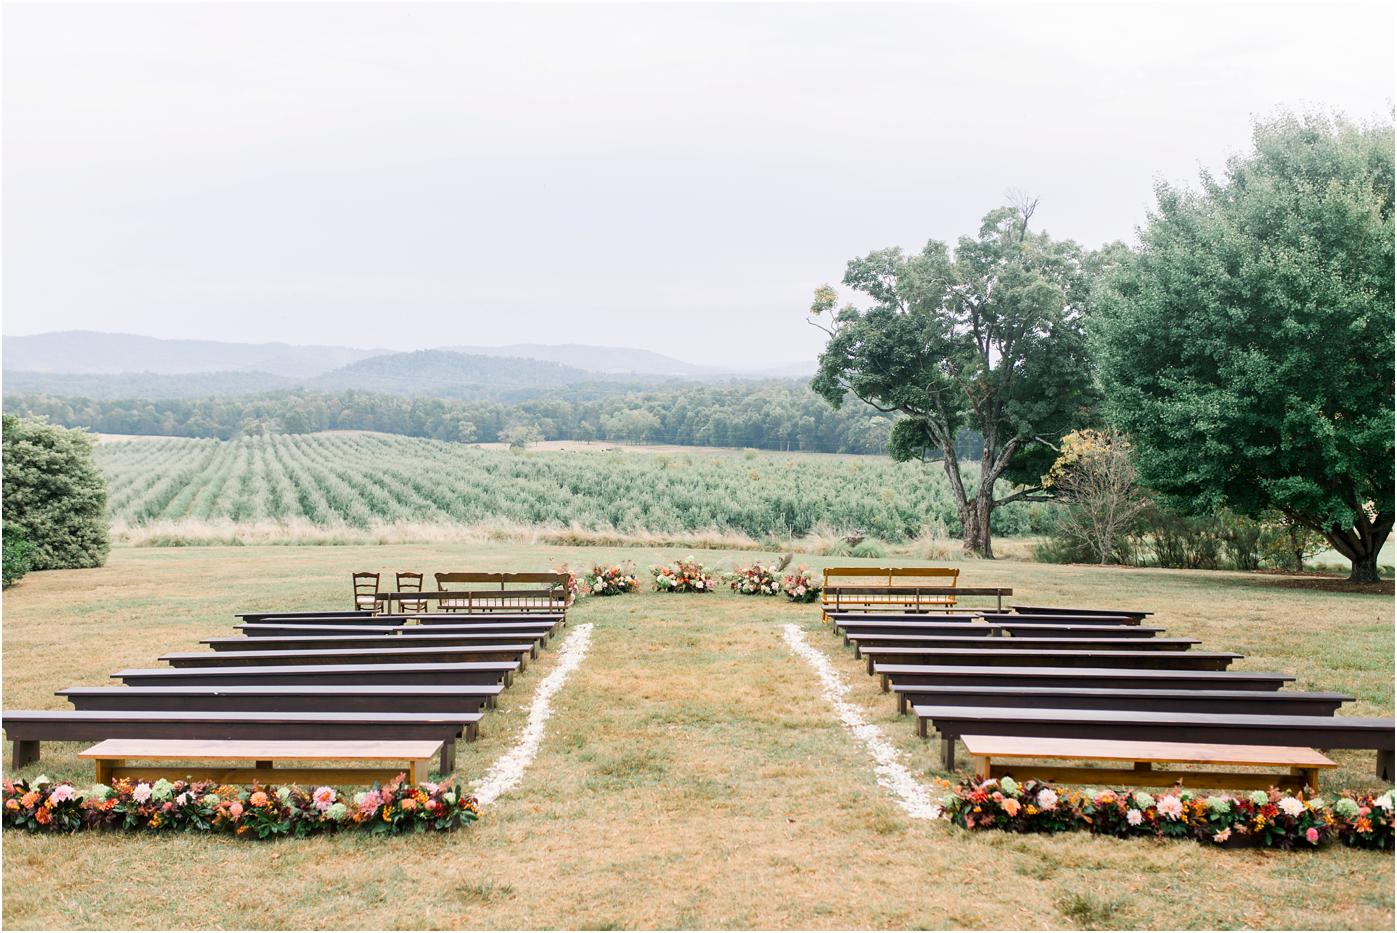 Ceremony location at Pharsalia weddings and events with stunning mountain views